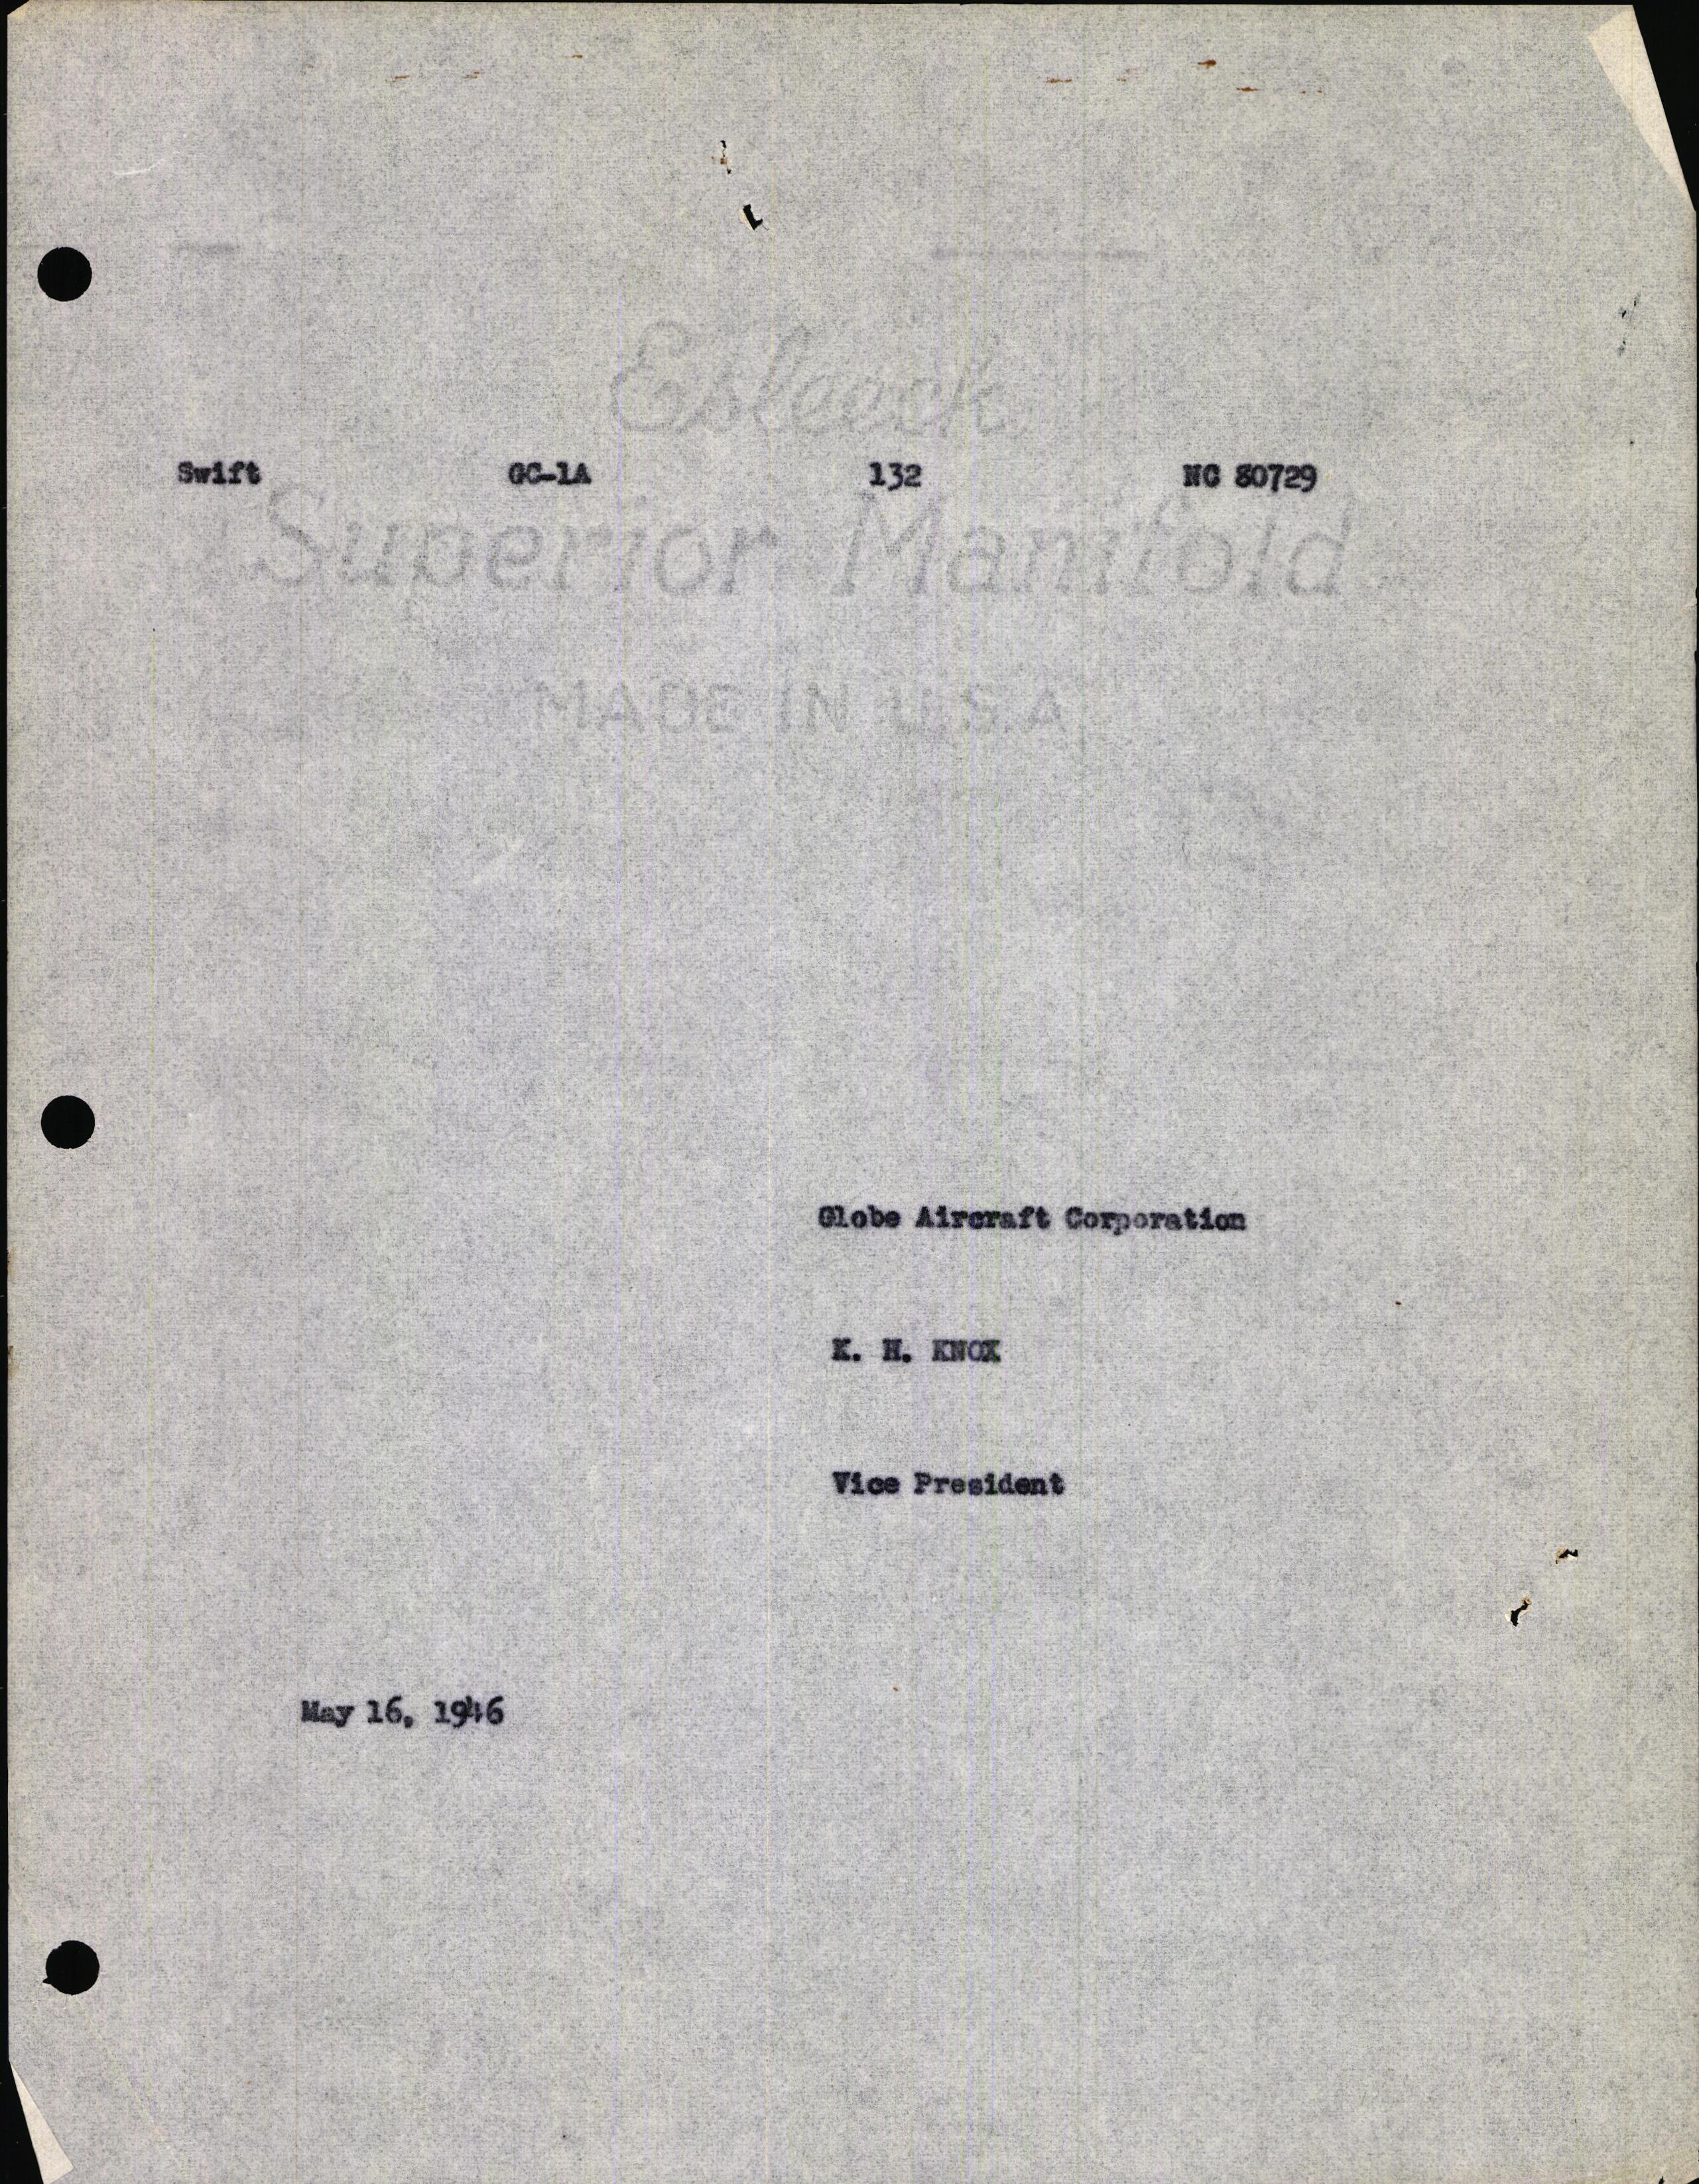 Sample page 5 from AirCorps Library document: Technical Information for Serial Number 132